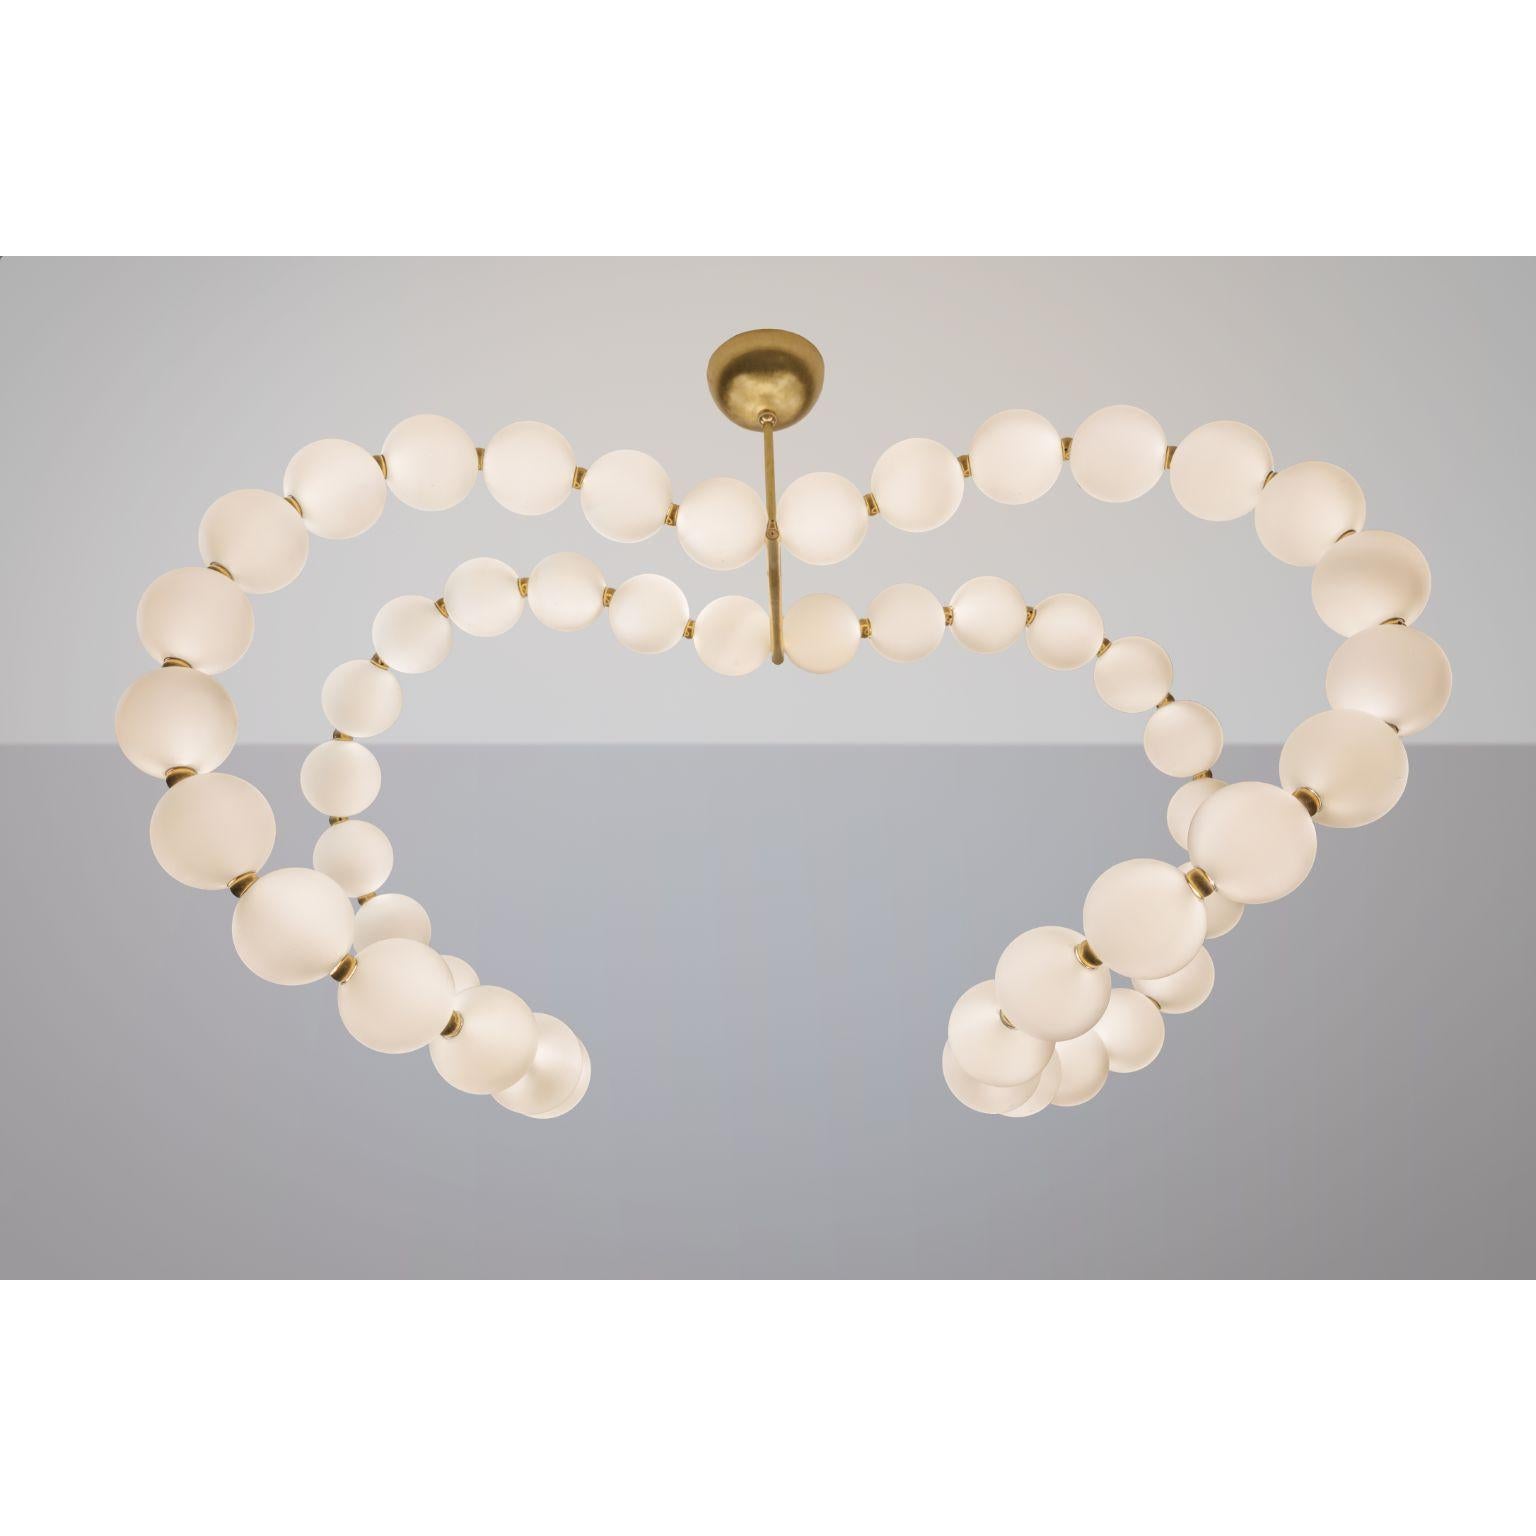 Courbes de Perles Chandelier by Ludovic Clément D’armont
Dimensions: D 115 x W 70 x H 92 cm
Materials: Blown glass, brass, LEDs

All our lamps can be wired according to each country. If sold to the USA it will be wired for the USA for